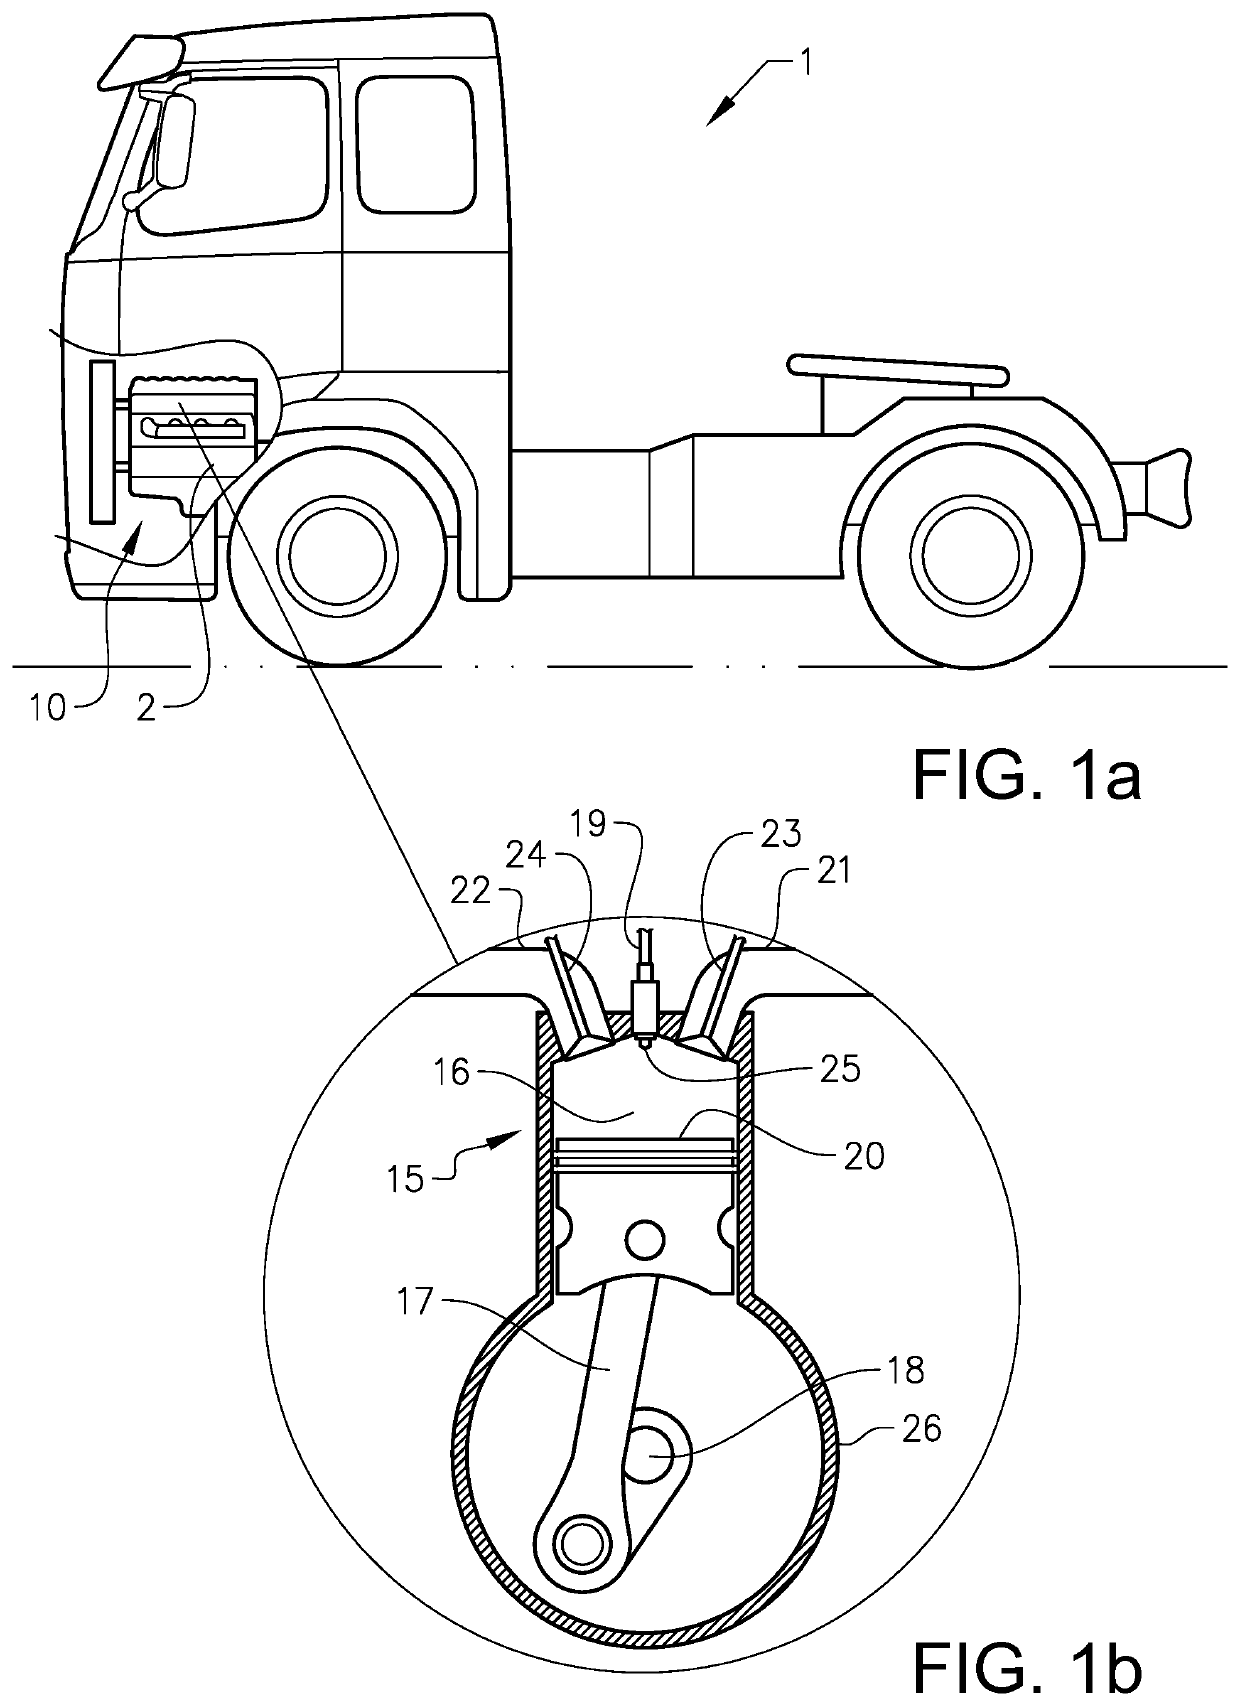 Piston for a cylinder for an internal combustion engine